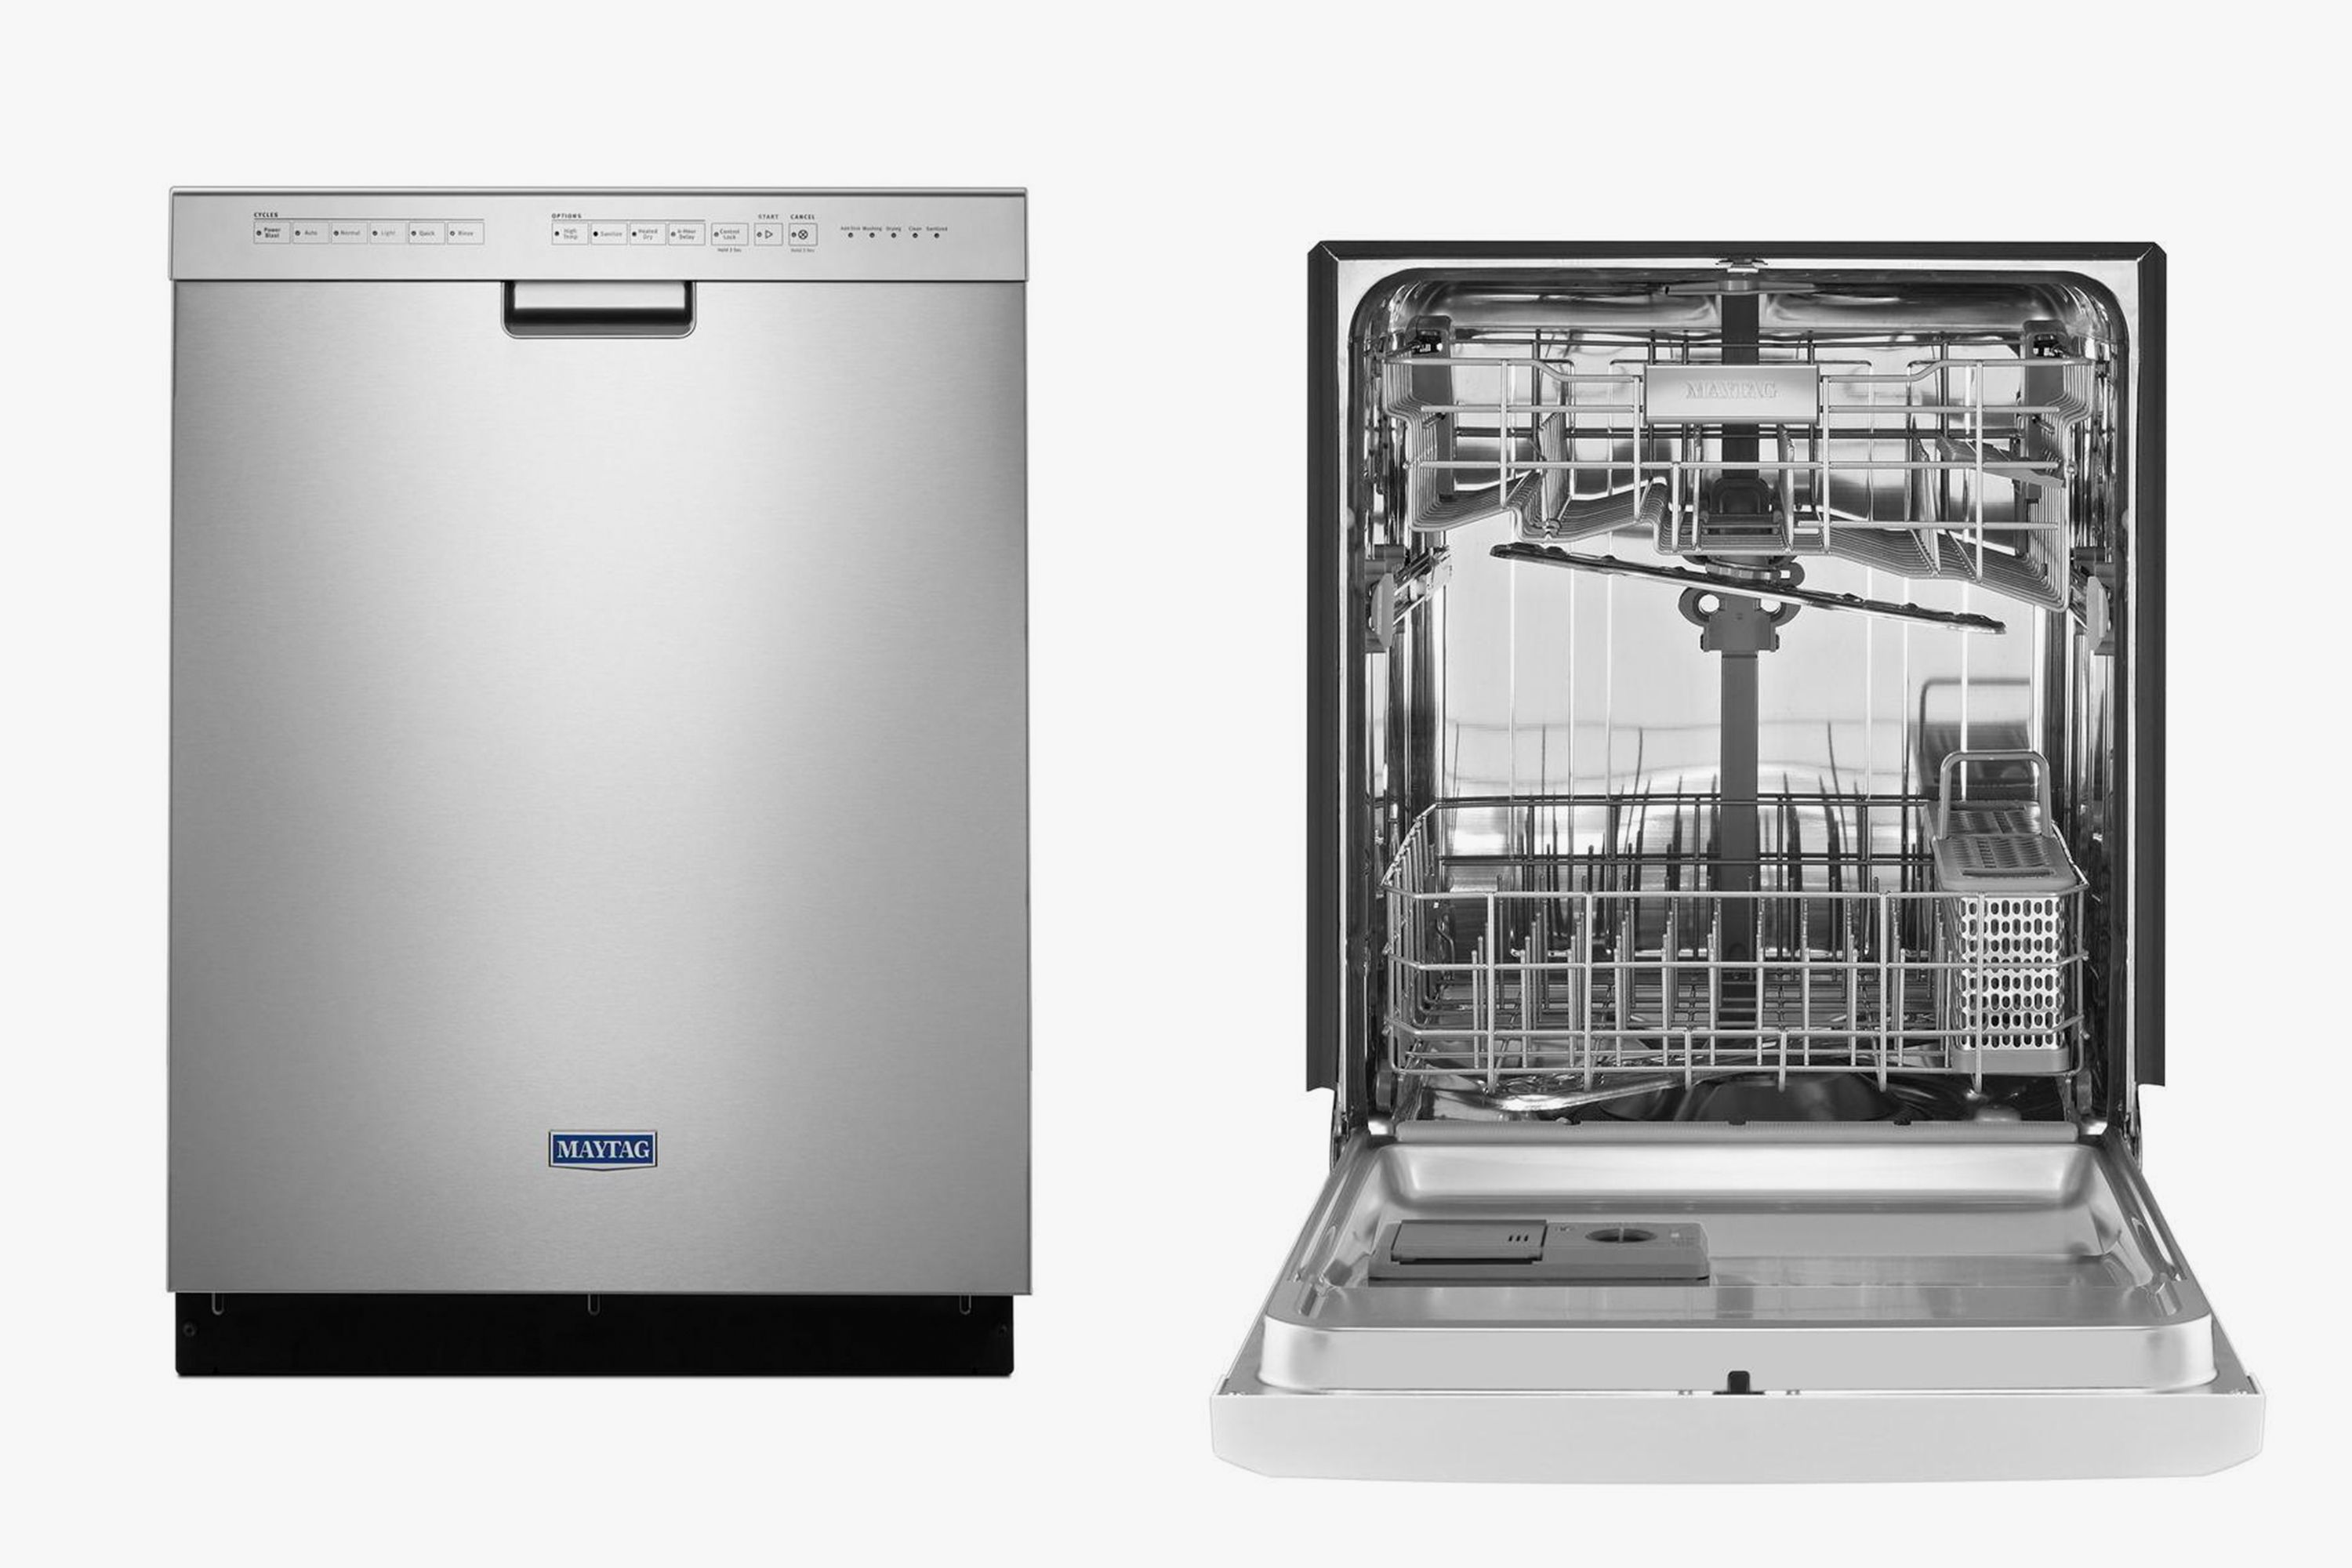 10-best-dishwashers-for-2019-top-rated-dishwasher-reviews-brands